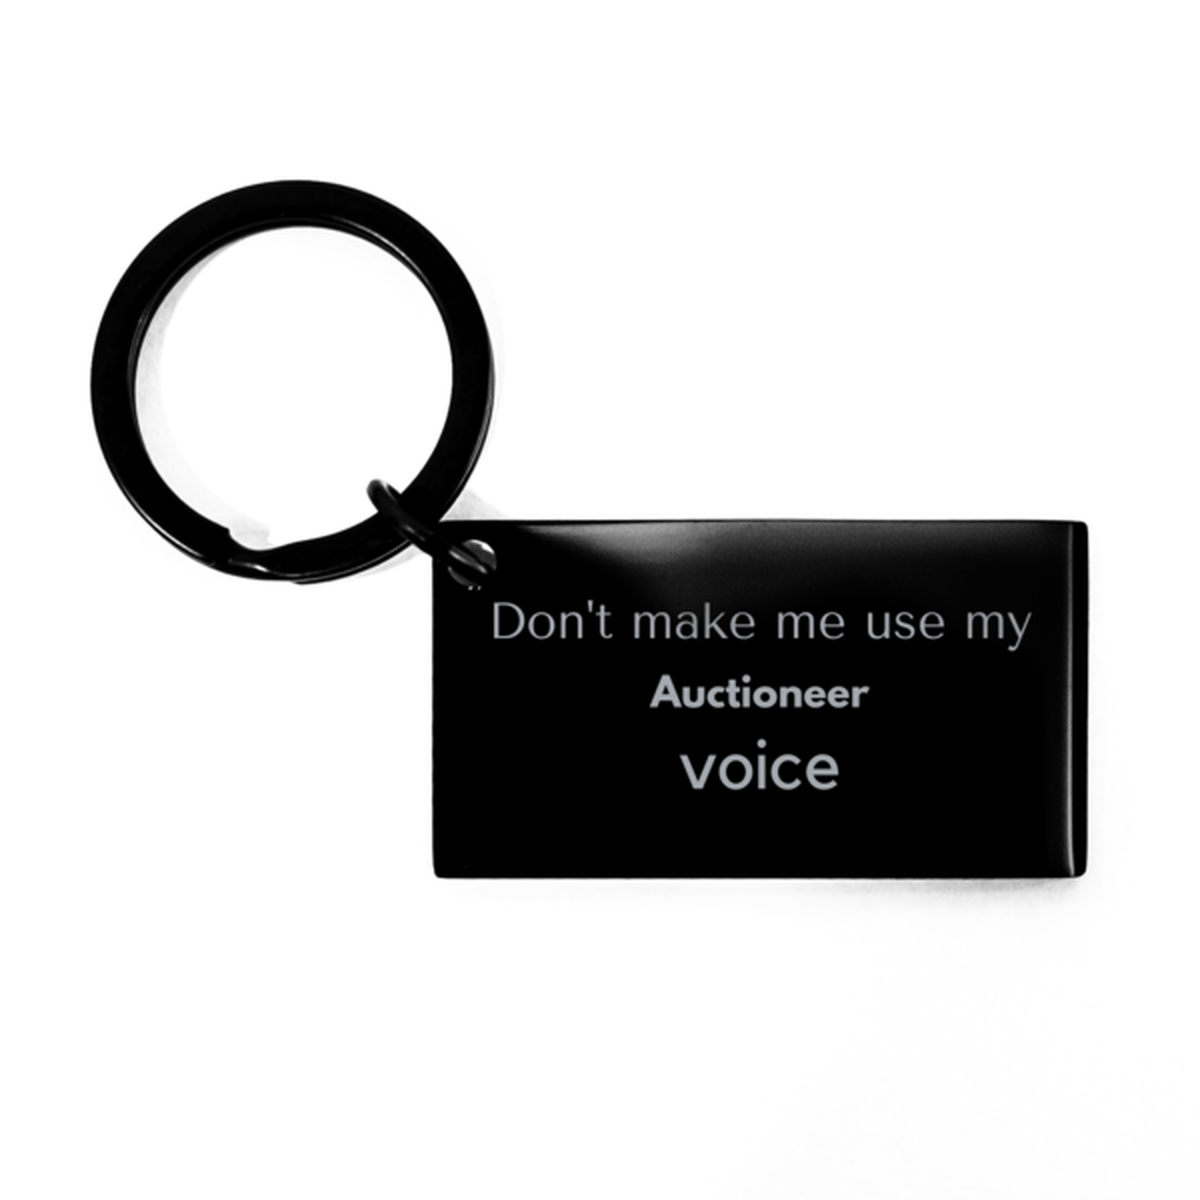 Don't make me use my Auctioneer voice, Sarcasm Auctioneer Gifts, Christmas Auctioneer Keychain Birthday Unique Gifts For Auctioneer Coworkers, Men, Women, Colleague, Friends